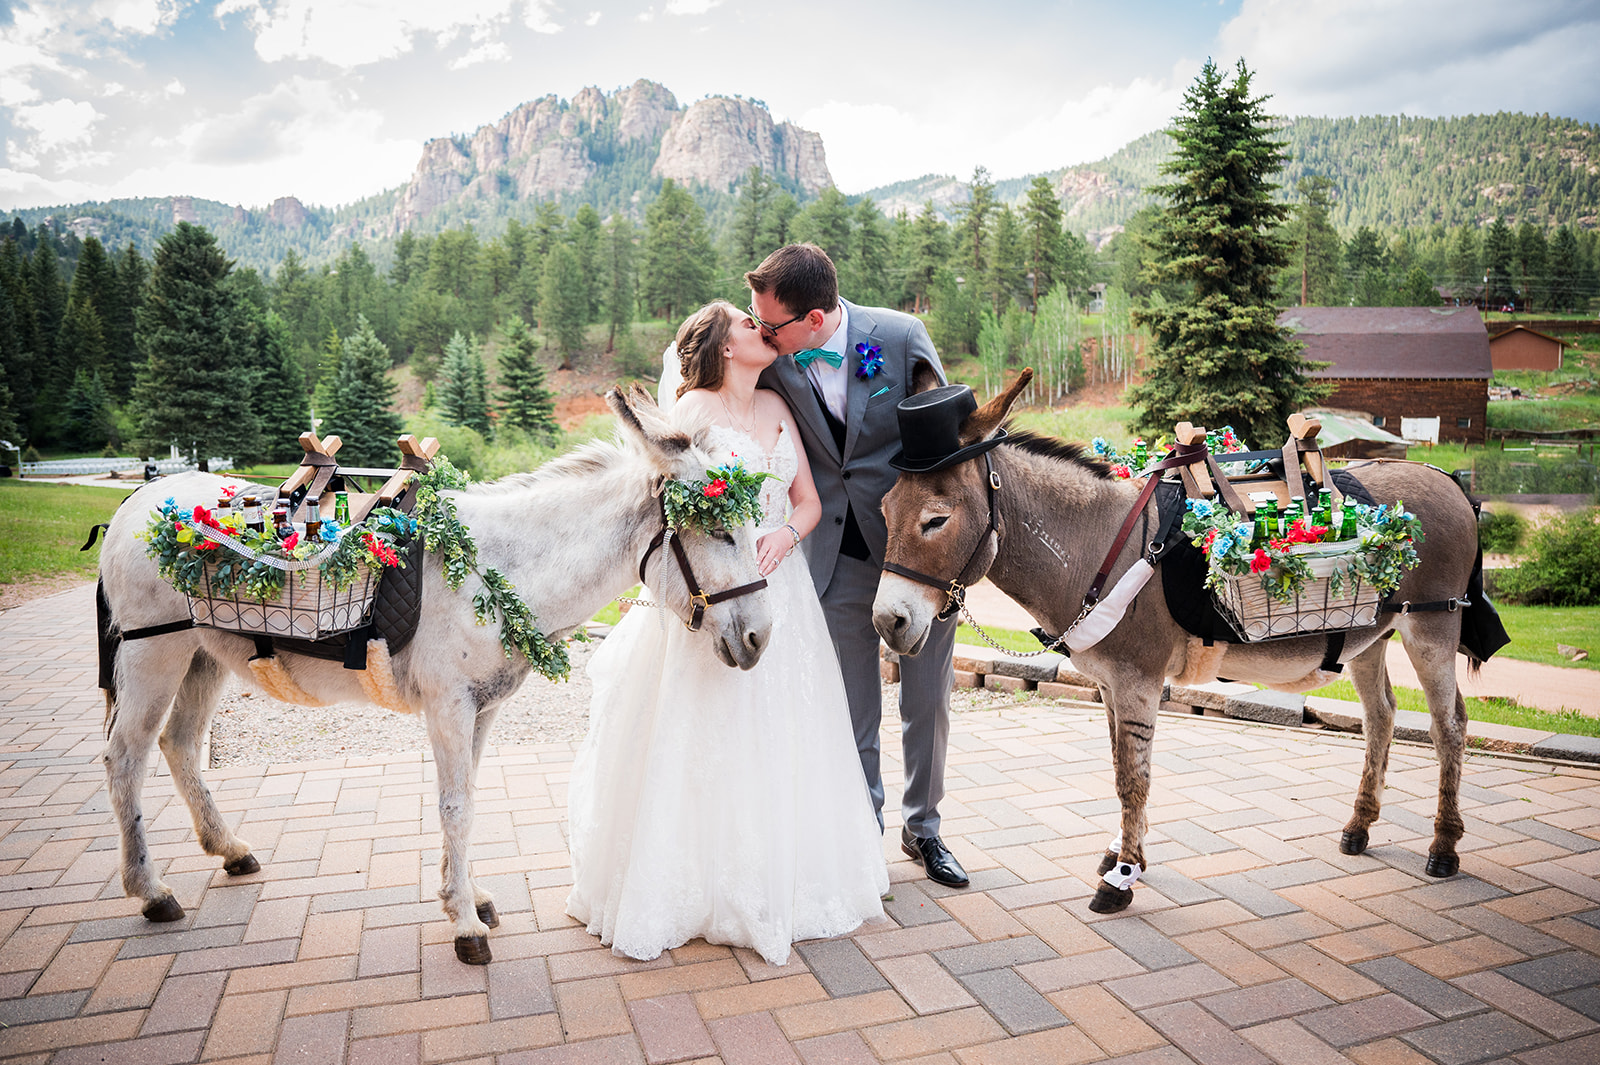 The bride and groom share a kiss holding beverage burros on either side of them.